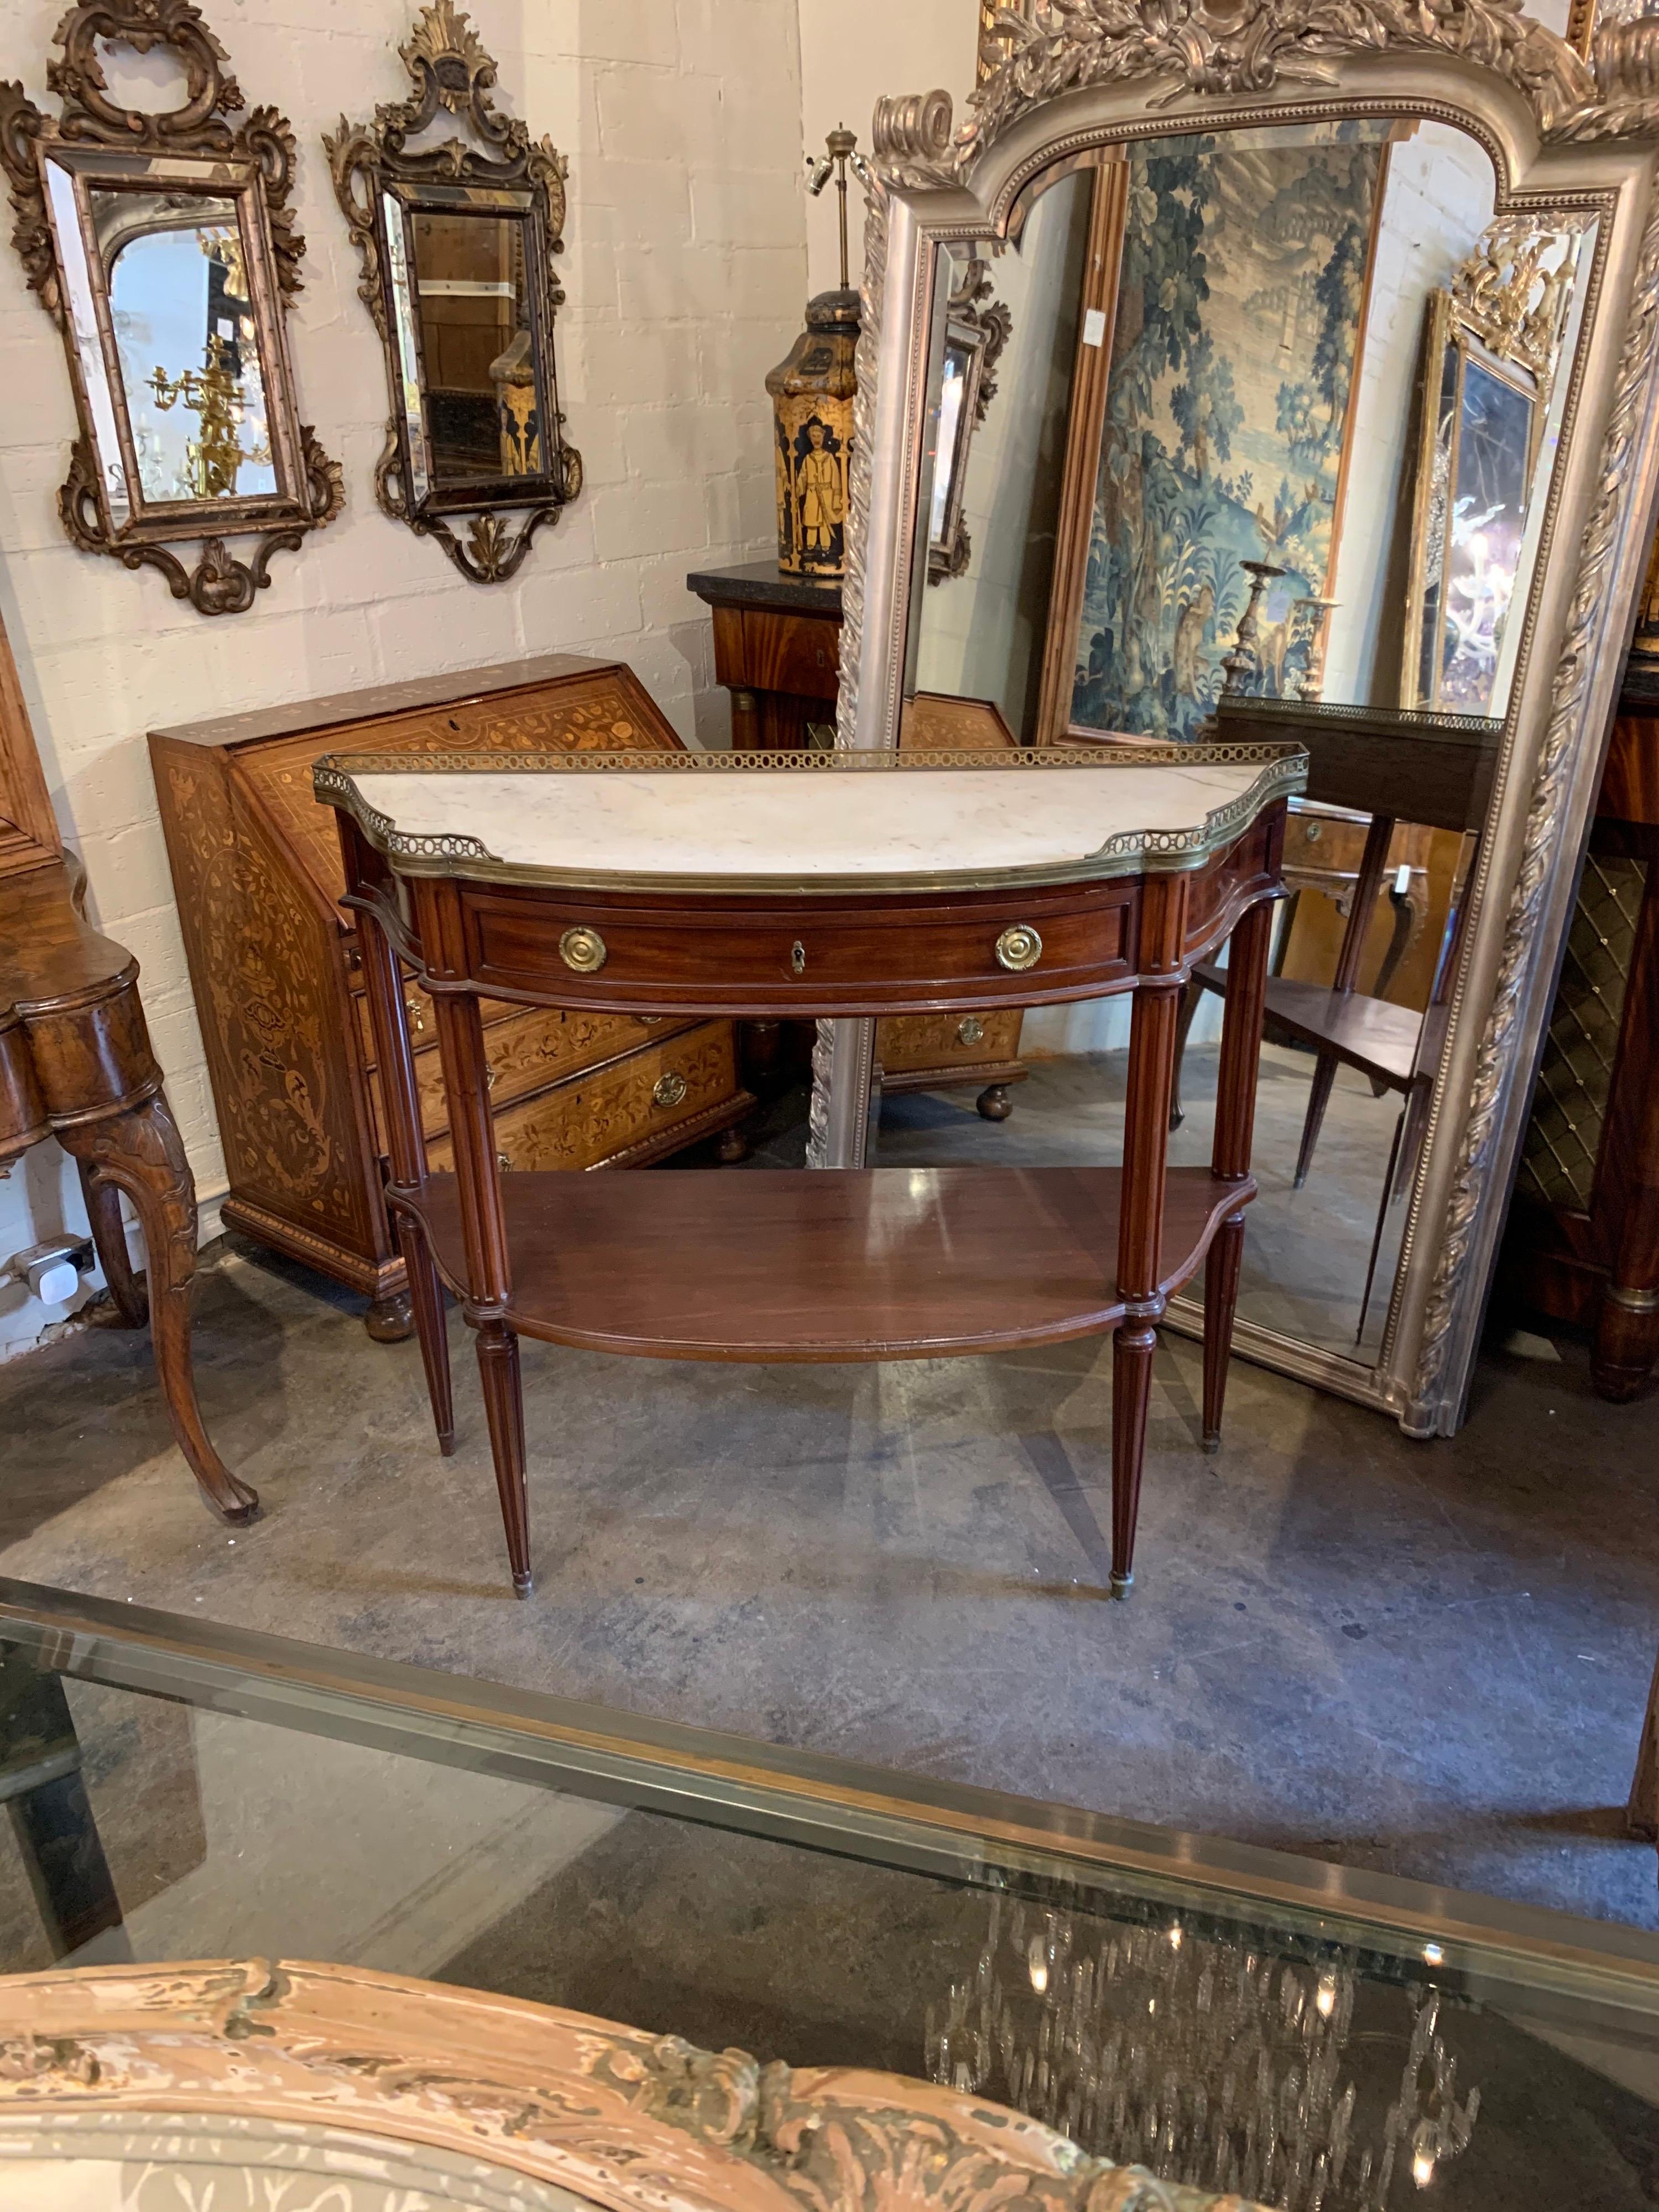 Classic 19th century French Directoire mahogany console with beautiful Carrara marble top. Very fine polished wood and pretty hardware. A lovely design element!
Note the height, this console is taller than most.